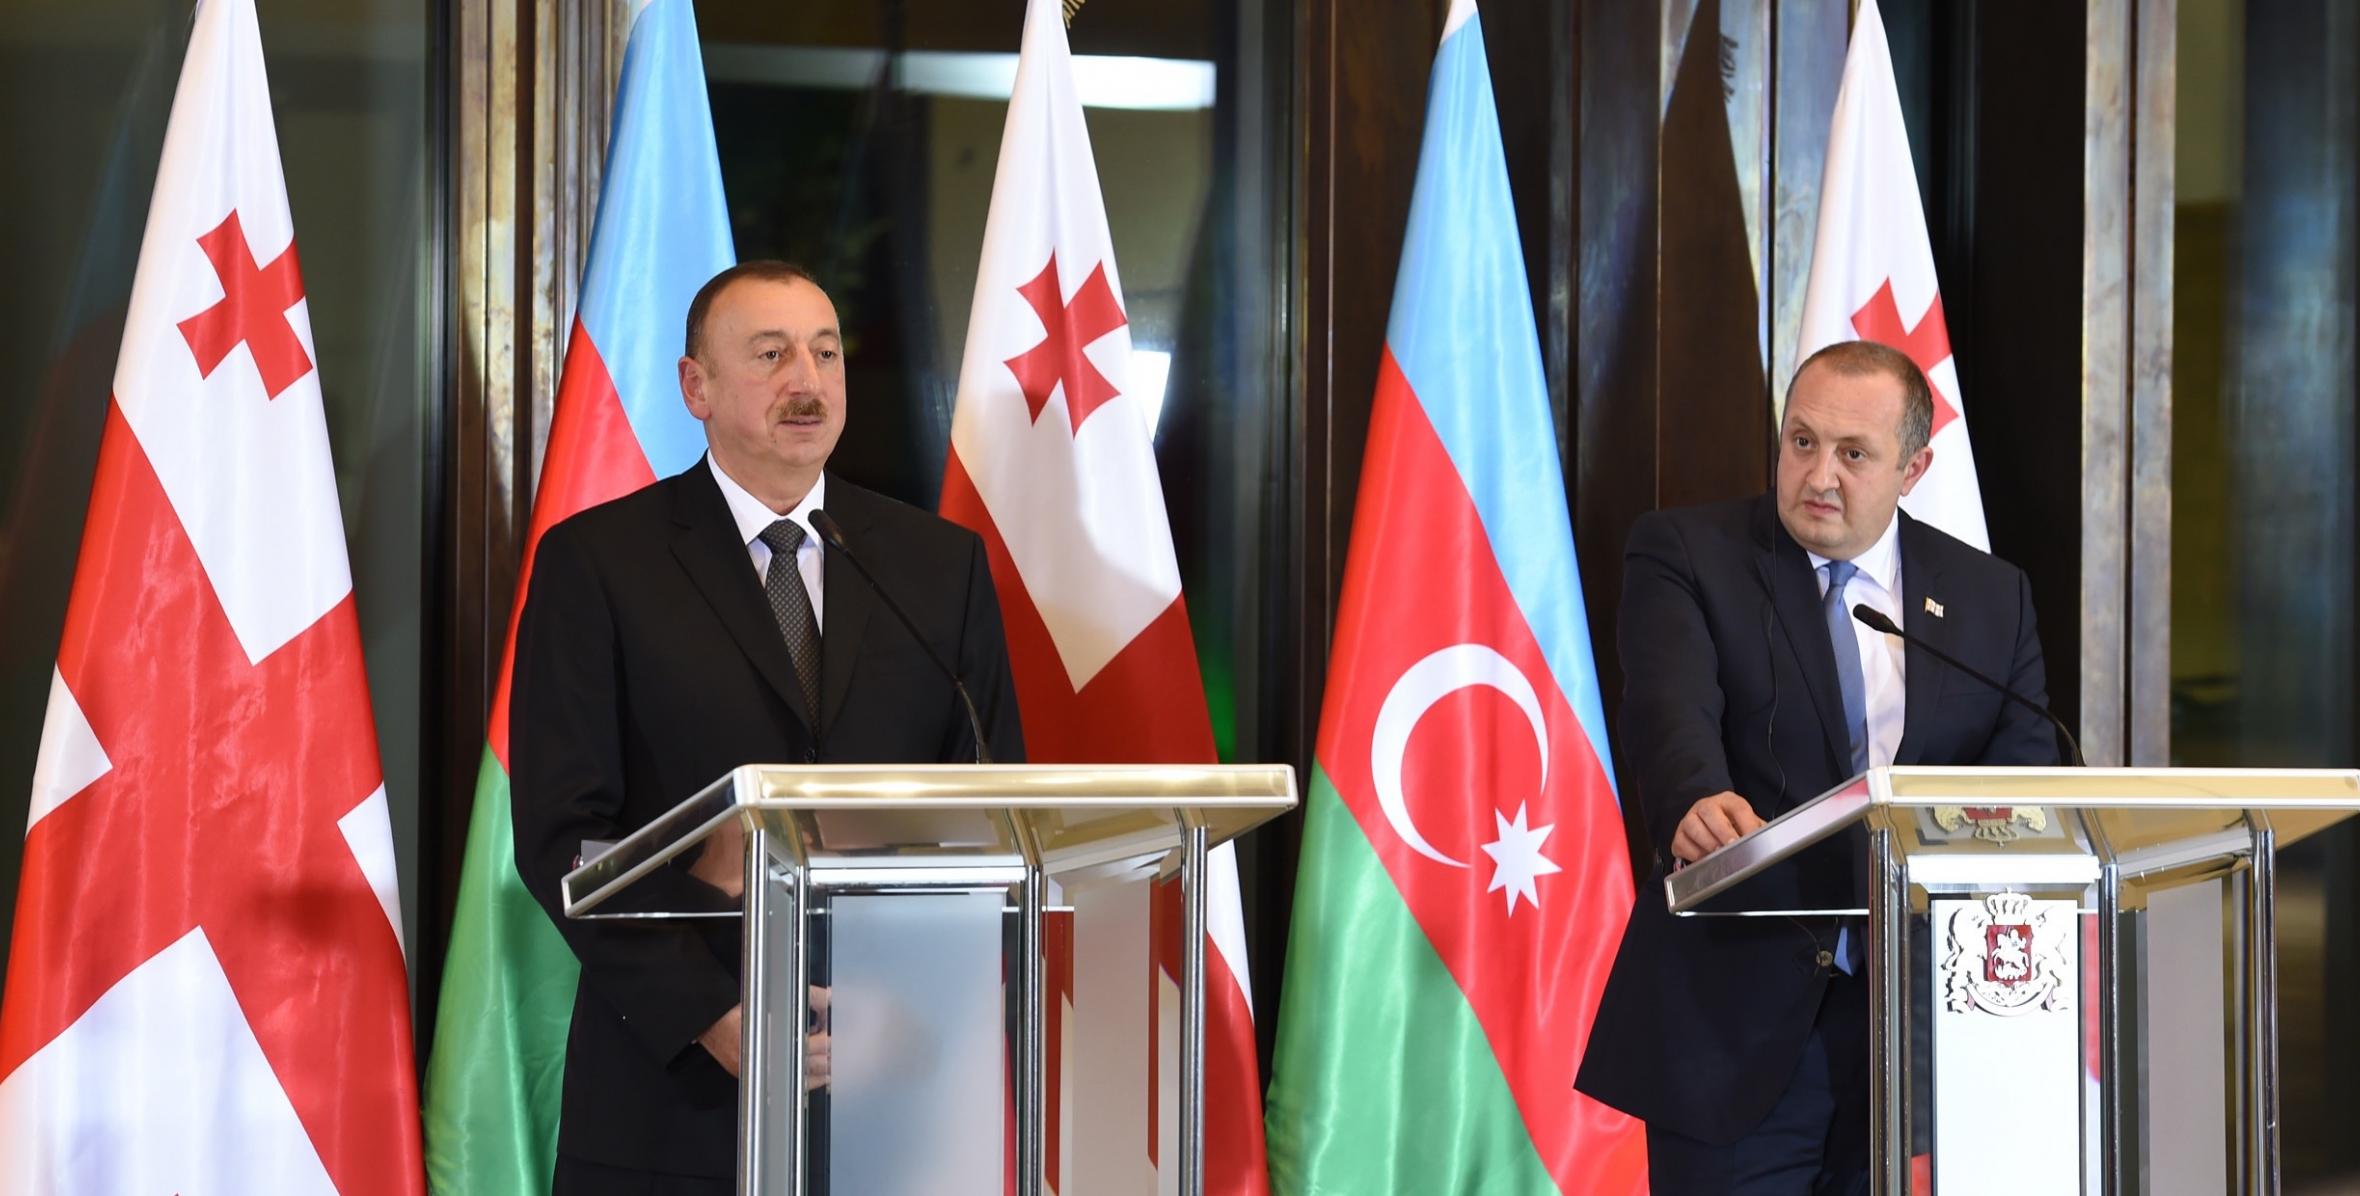 Presidents of Azerbaijan and Georgia made statements for the press